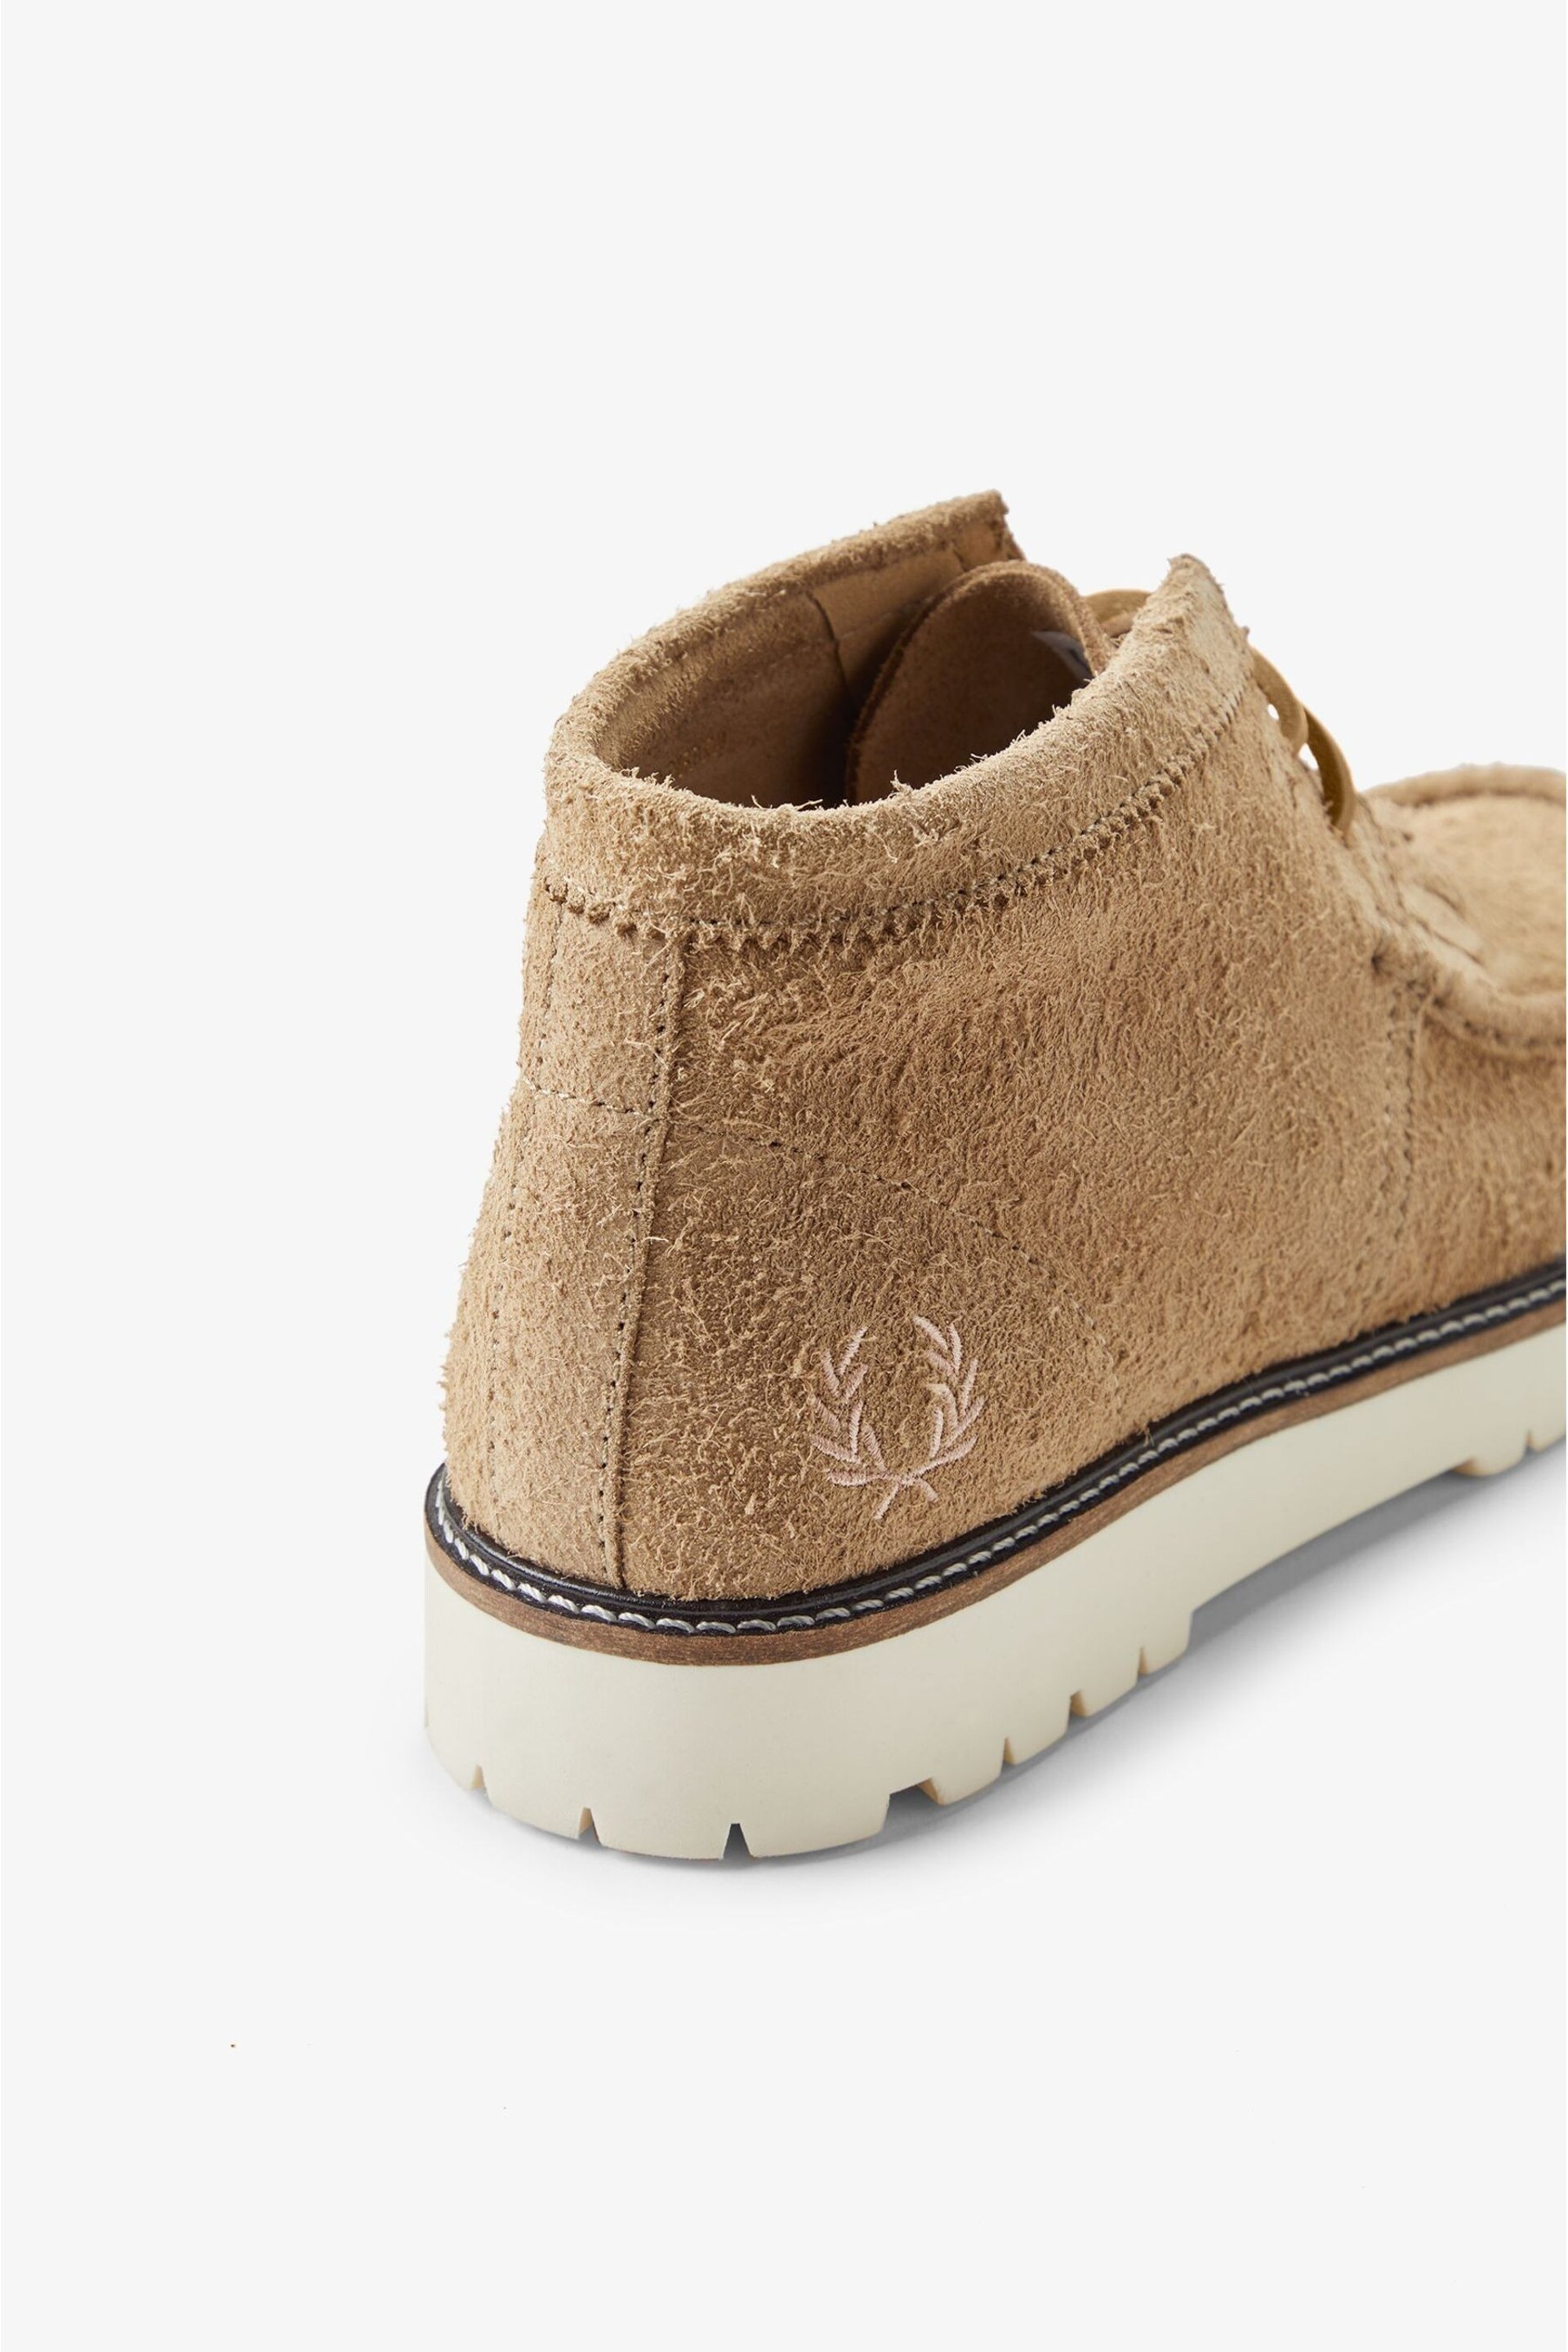 Fred Perry Stone Kenny Boots - Image 3 of 9